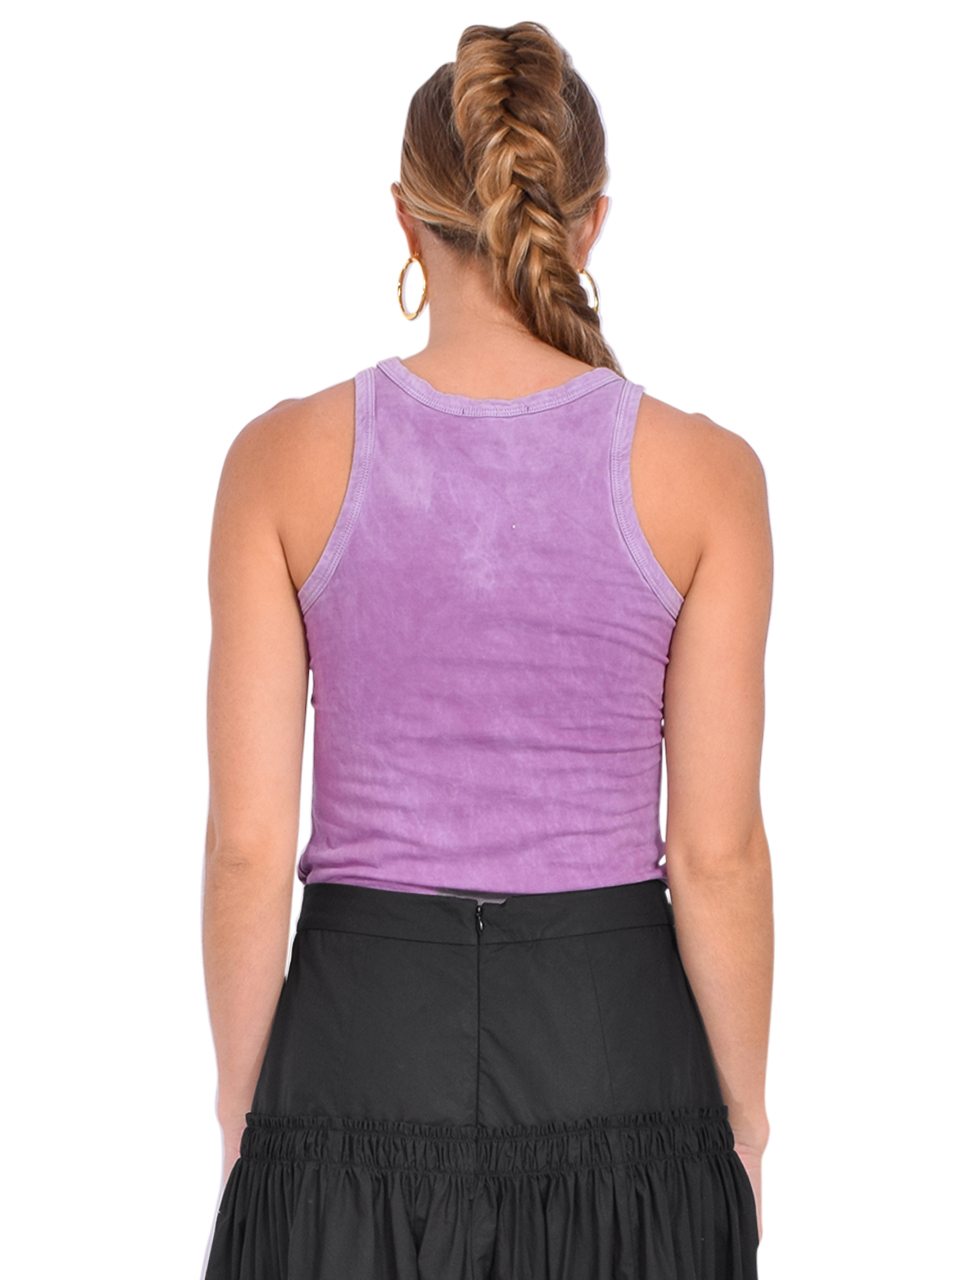 COTTON CITIZEN Standard Tank in Vintage Orchid Back View 